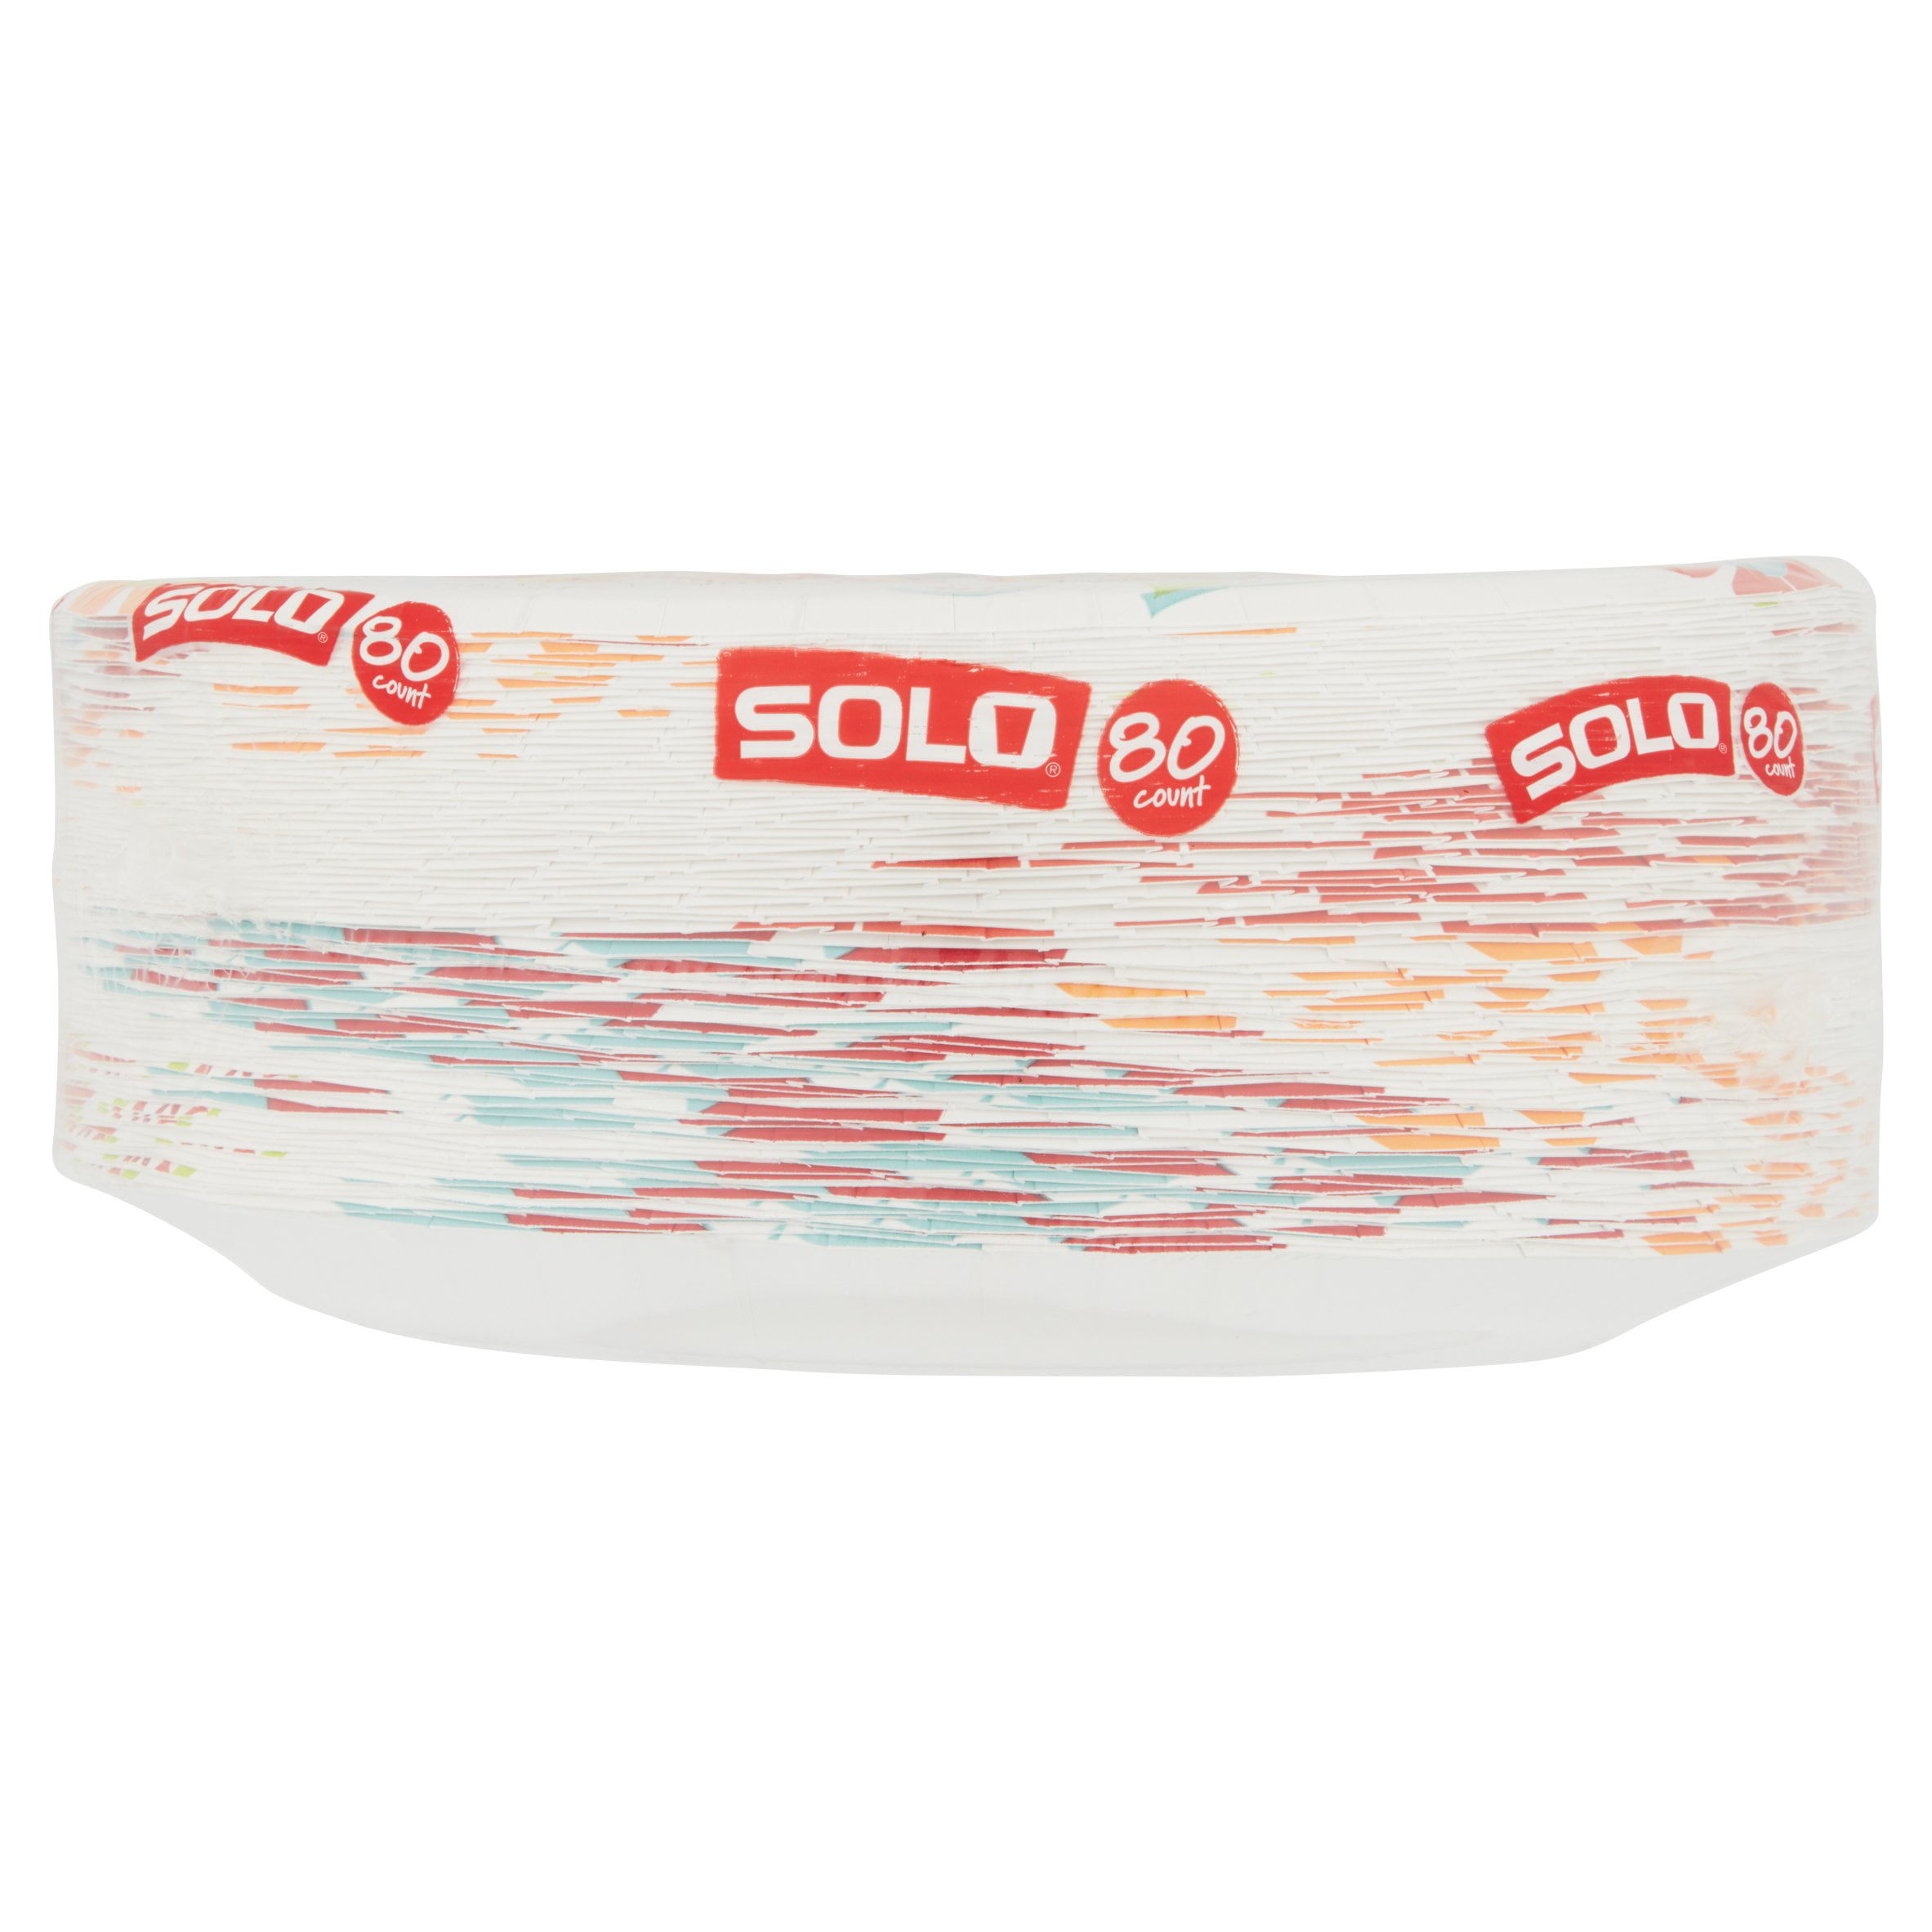 Solo Heavy Duty 10-Inch Paper Plates, 55 ct - King Soopers